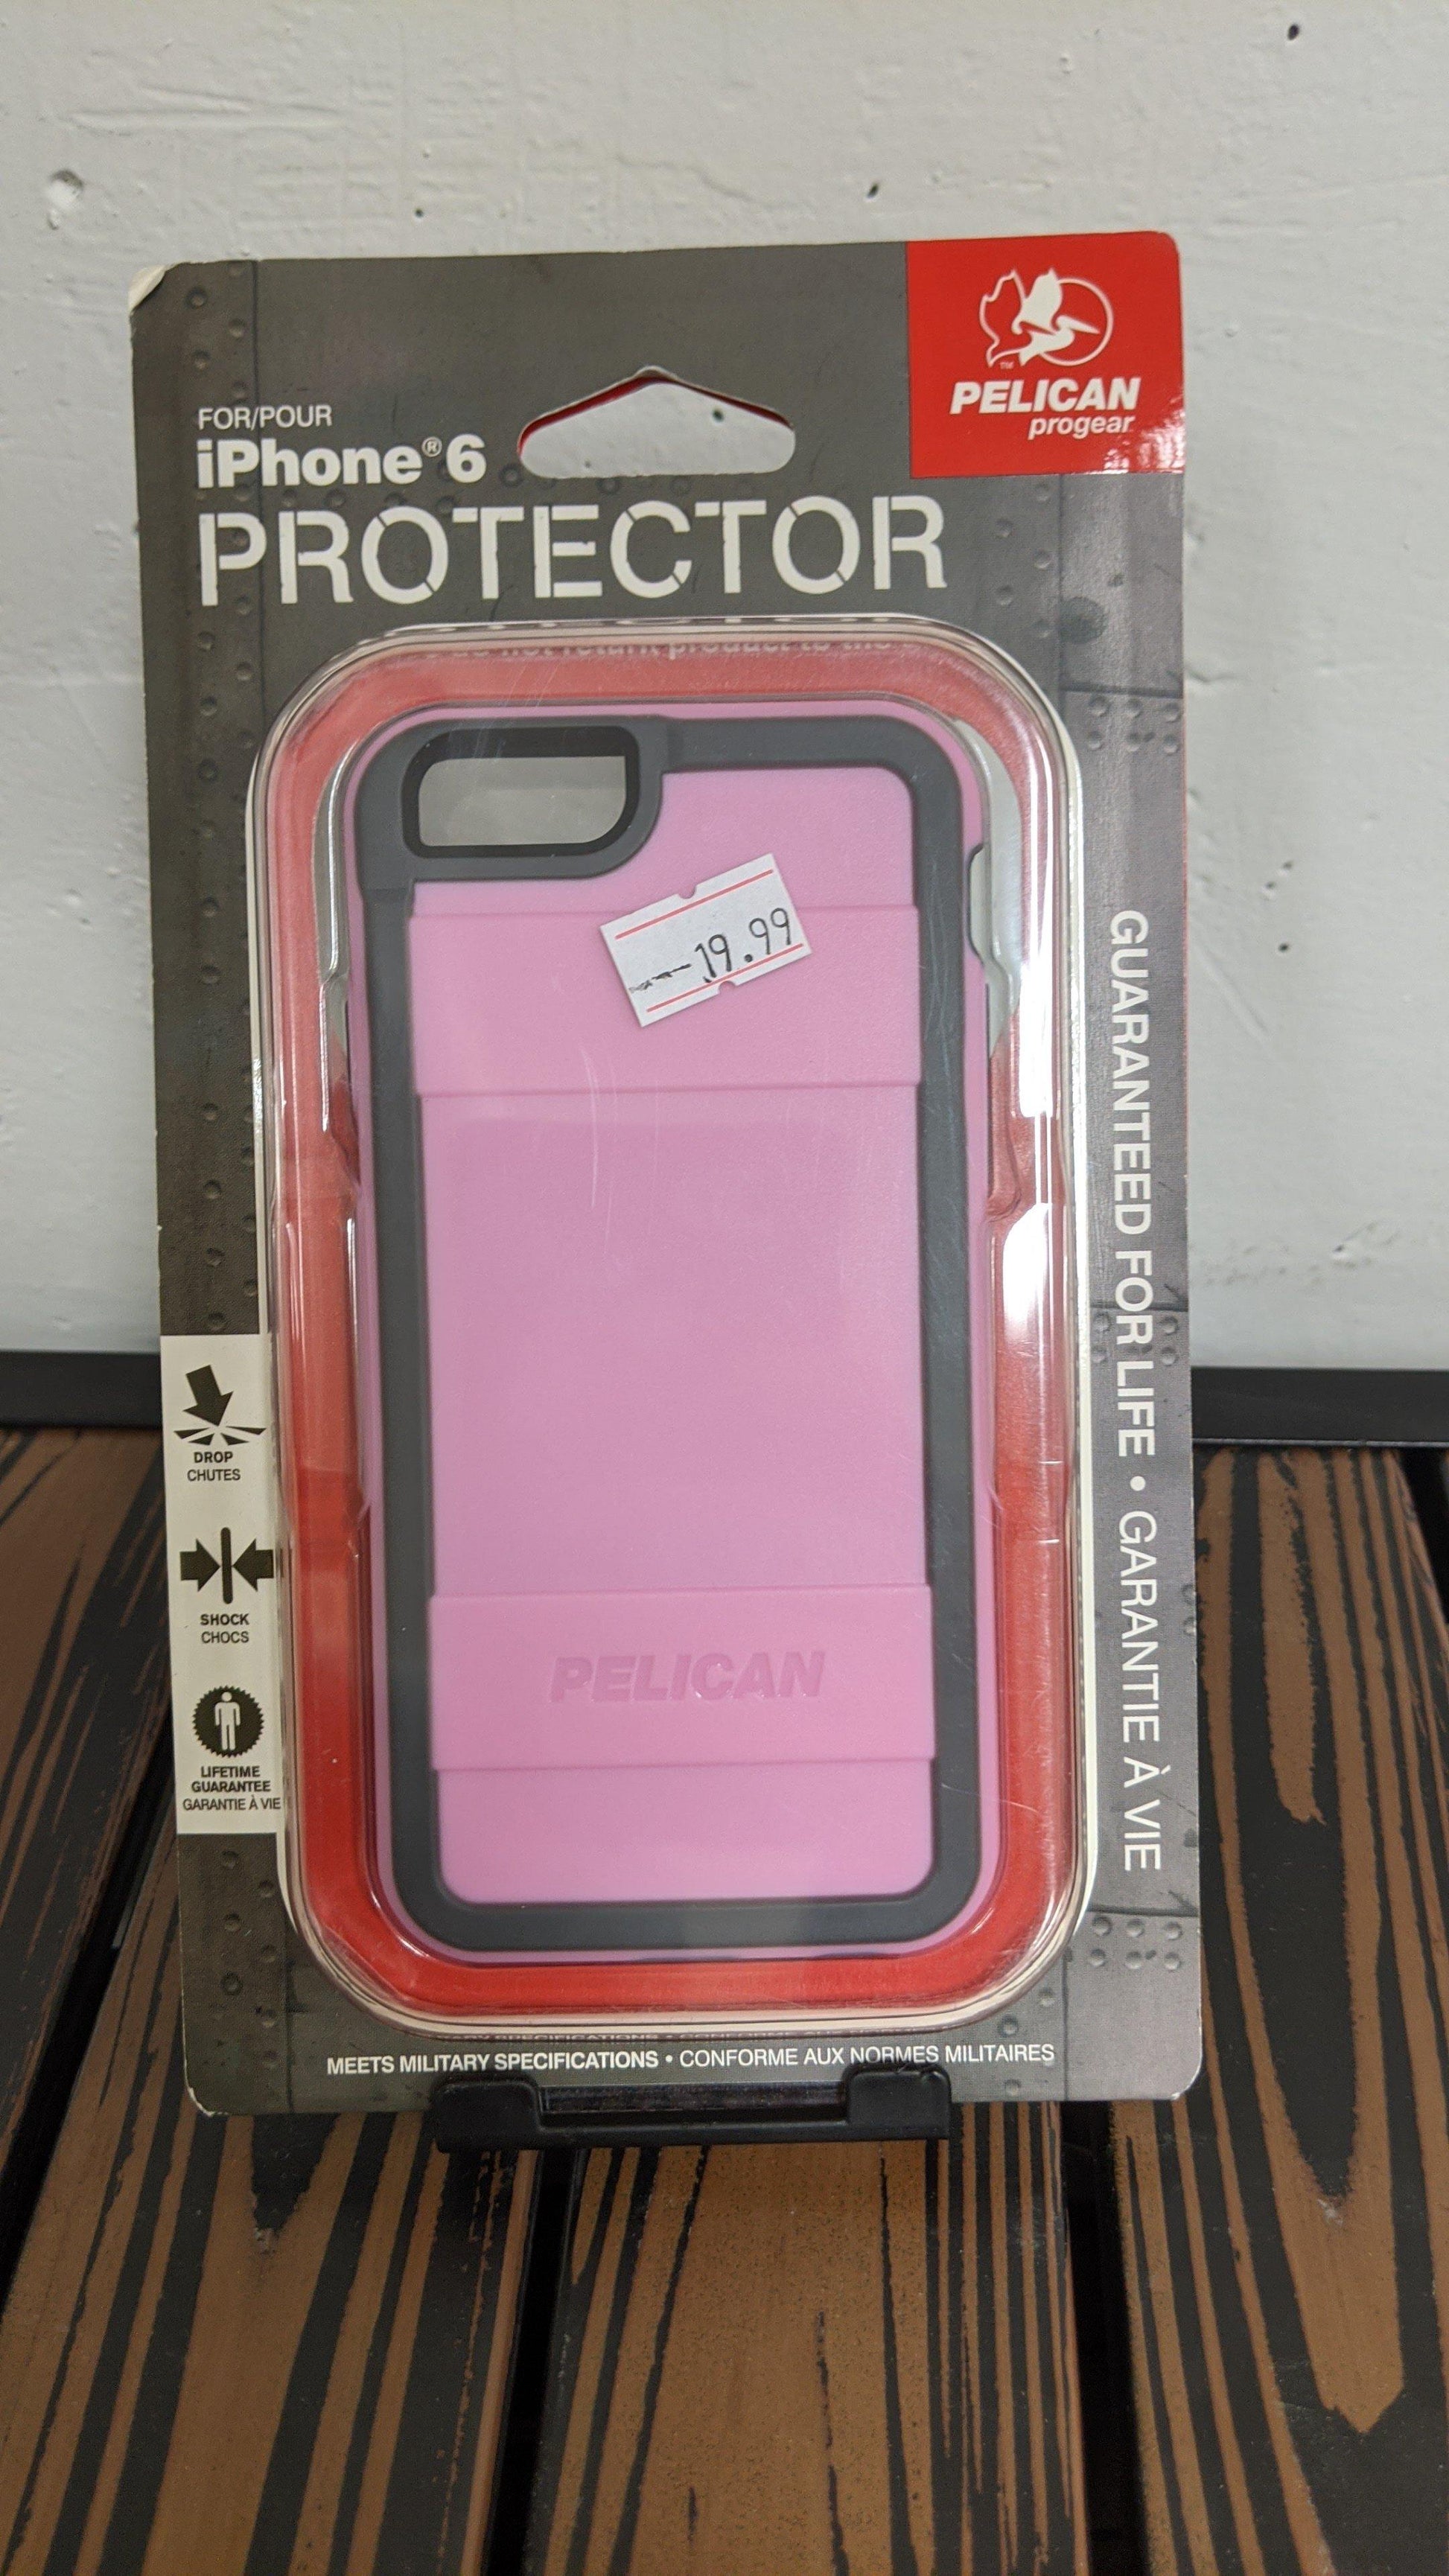 Pelican Progear iPhone 6 Protector - PCMaster Pro 